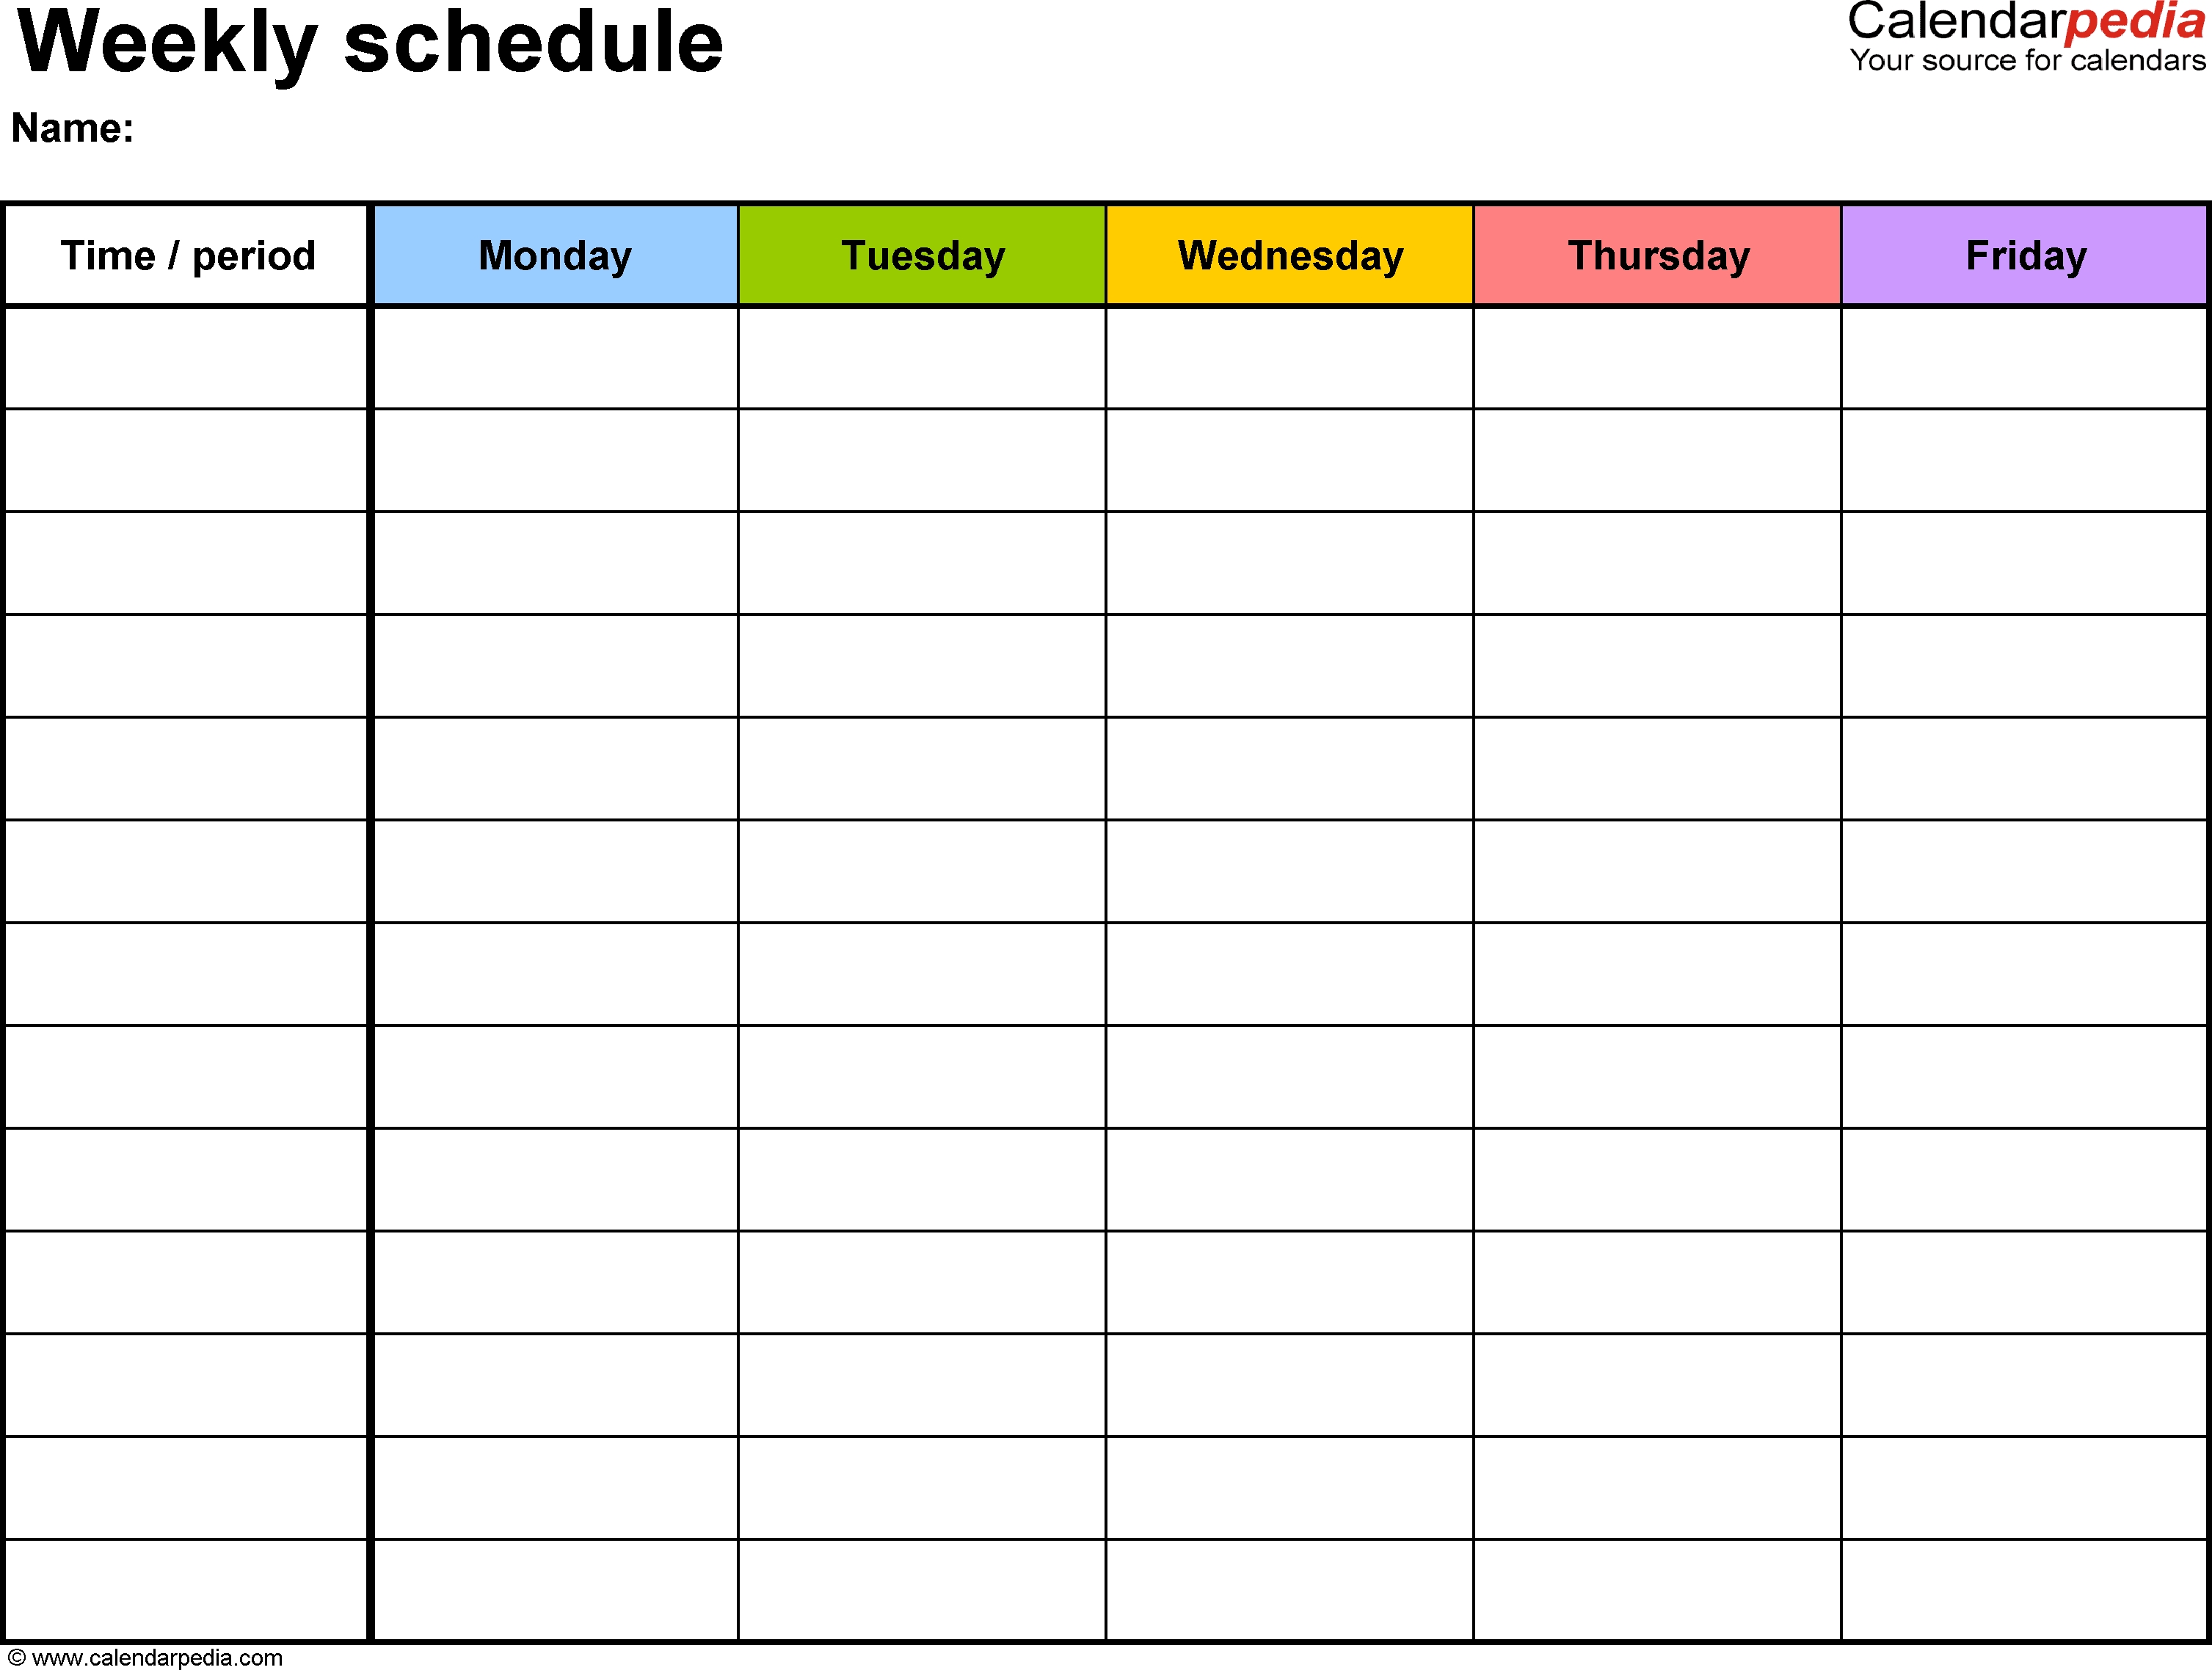 Free Weekly Schedule Templates For Word - 18 Templates Calendar Html Template Free Download